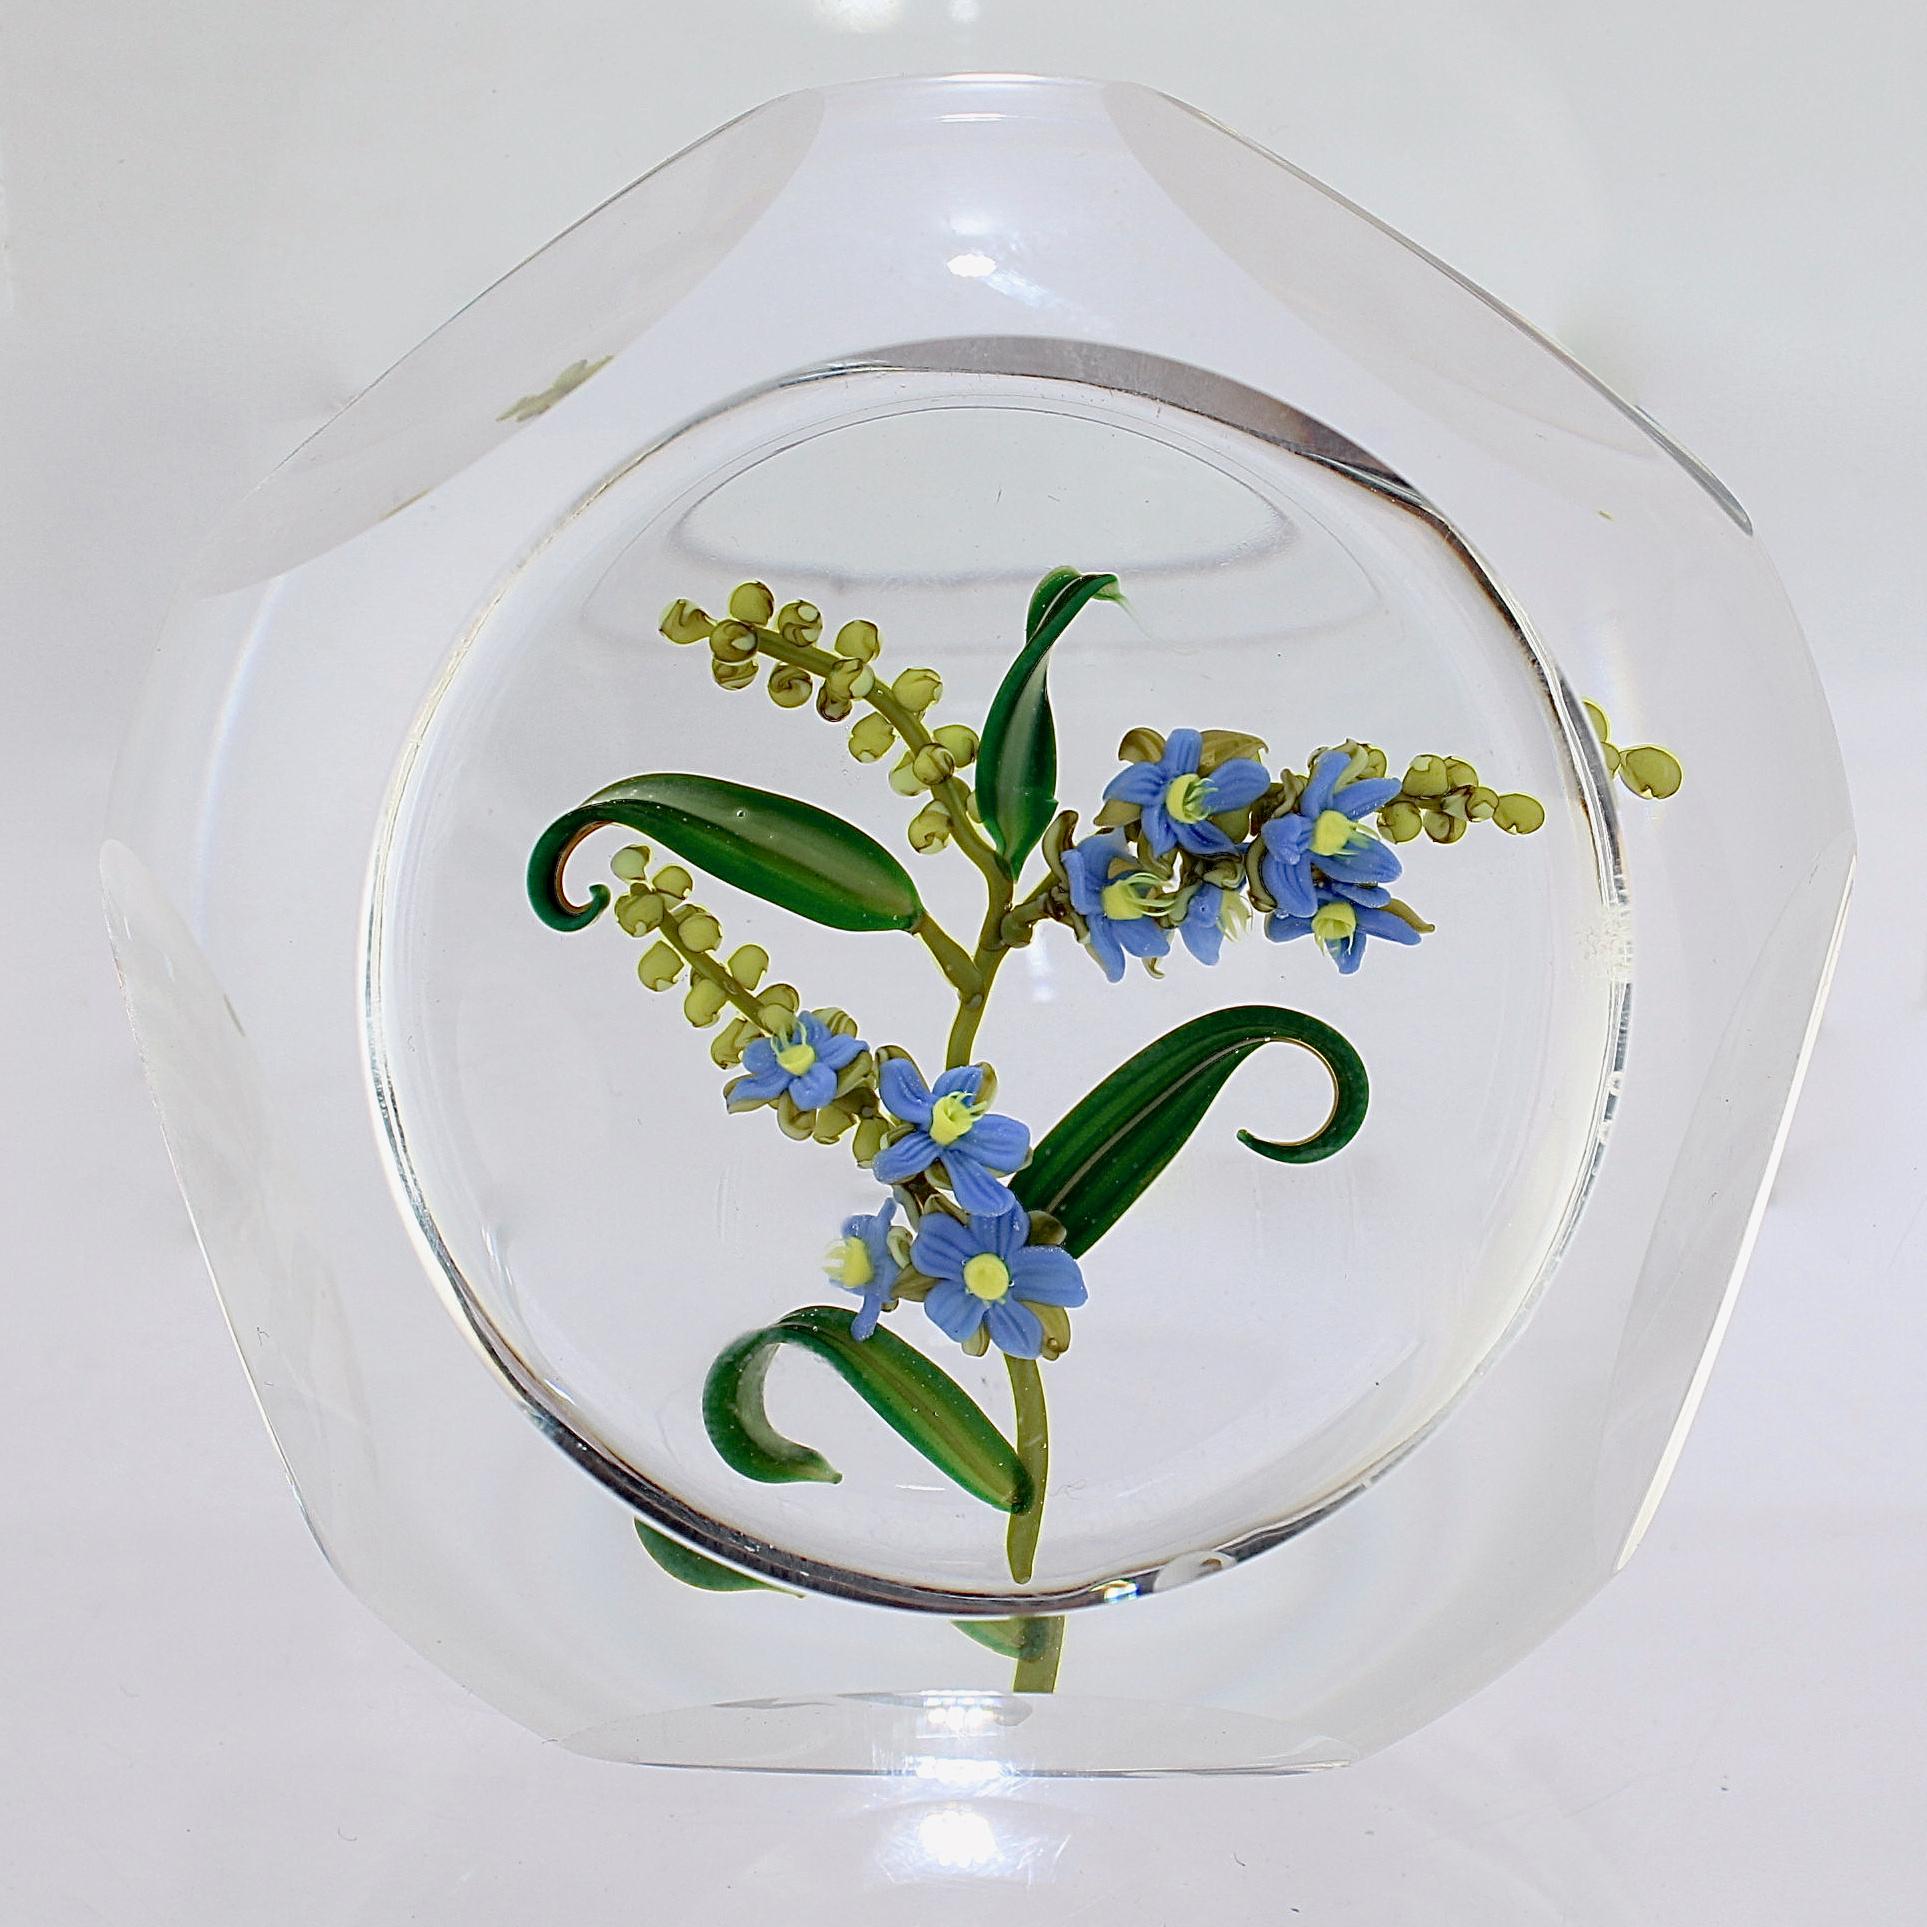 A fine Paul Stankard glass faceted paperweight.

With lampwork forget-me-not flowers in blues and yellows with green stems and leaves.

Bearing a signature cane and etched edition number to the side.

Simply a wonderful paperweight from one of